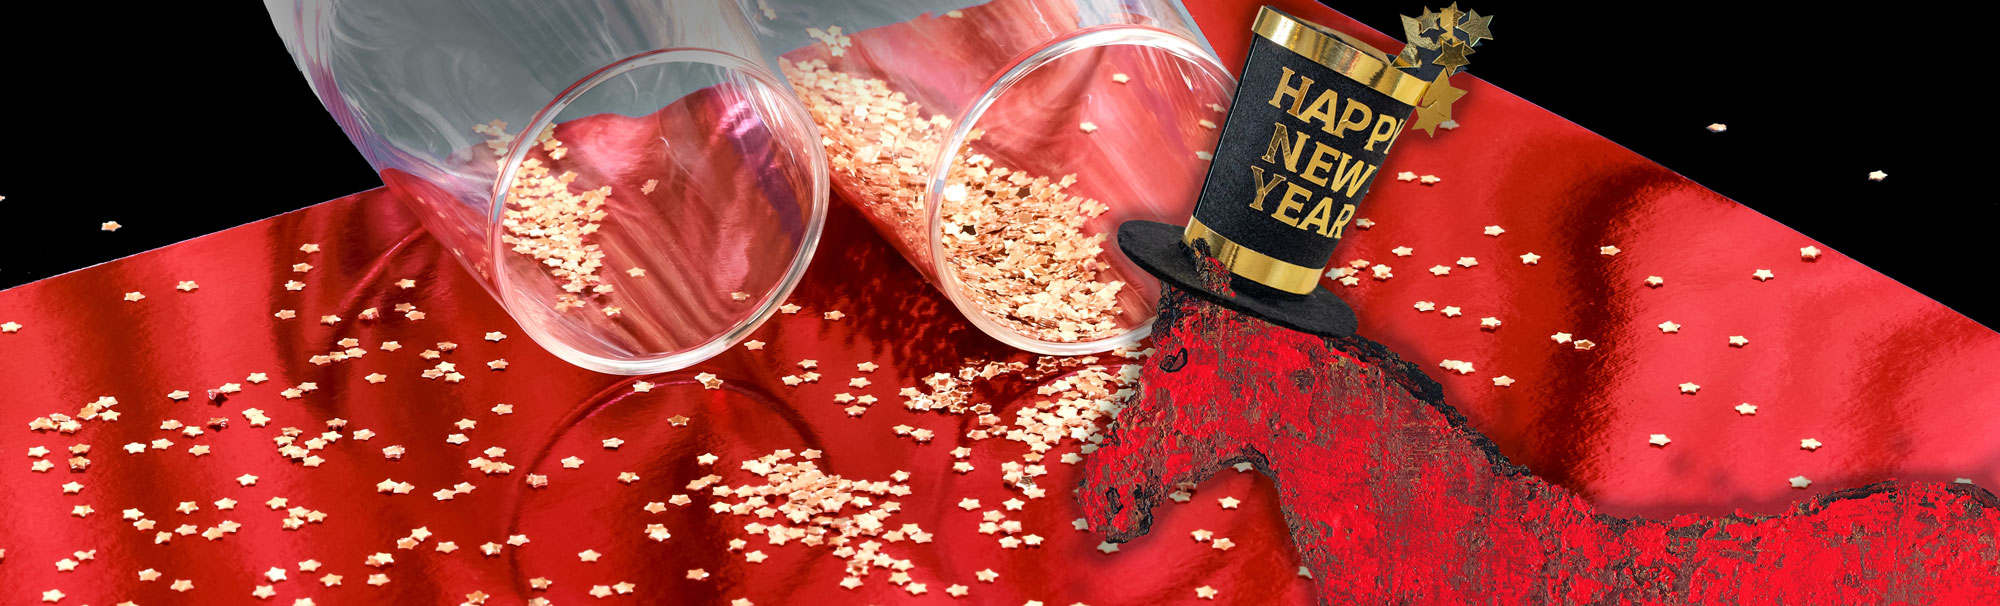 Red Horse by David Burke New Year's Eve